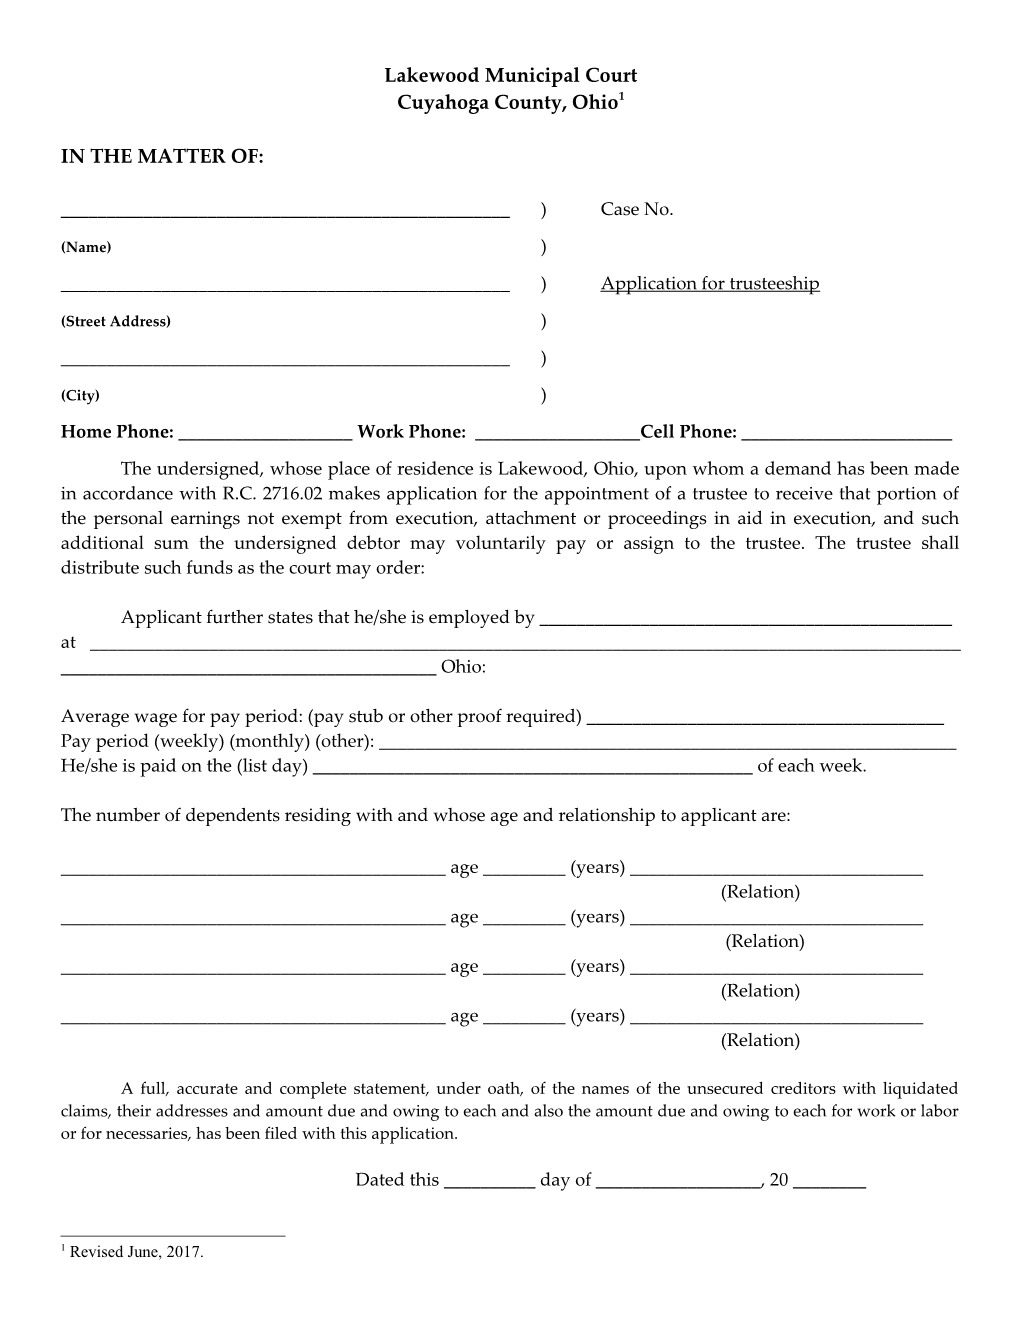 Application for the Appointment of a Trustee